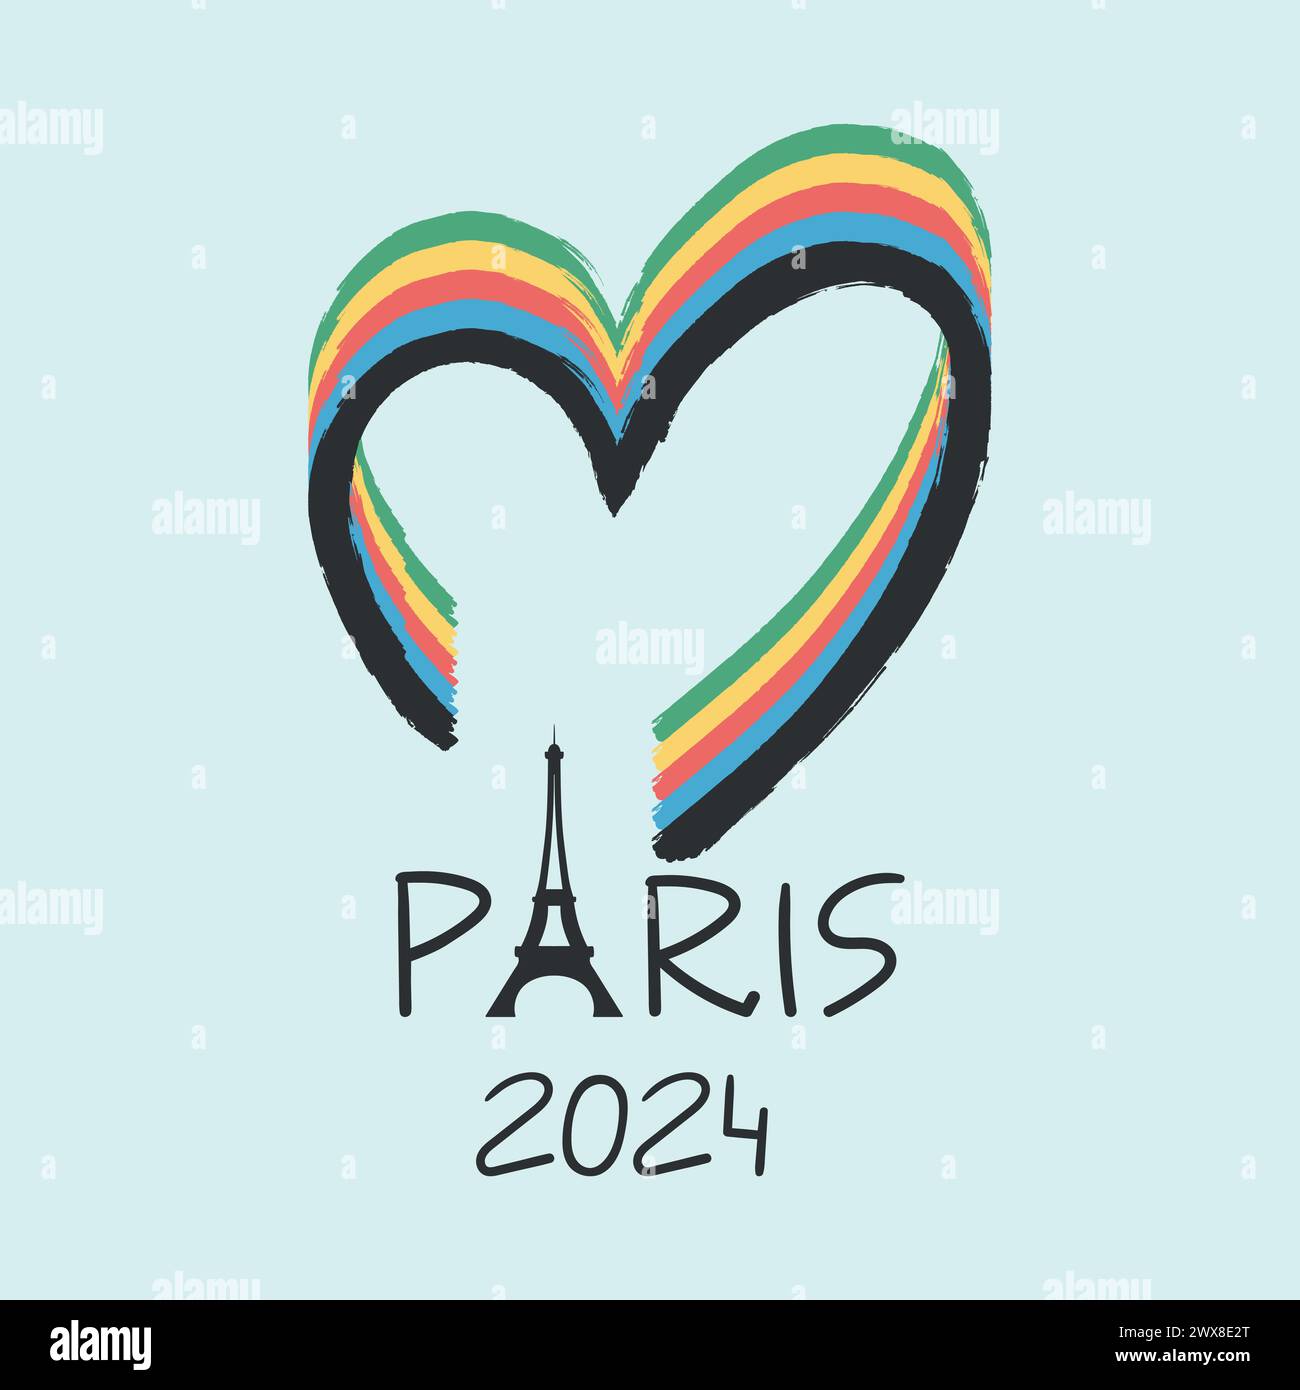 Paris 2024 Olympic sport games design. Background with brush painted heart and Eiffel tower silhouette. Vector illustration Stock Vector